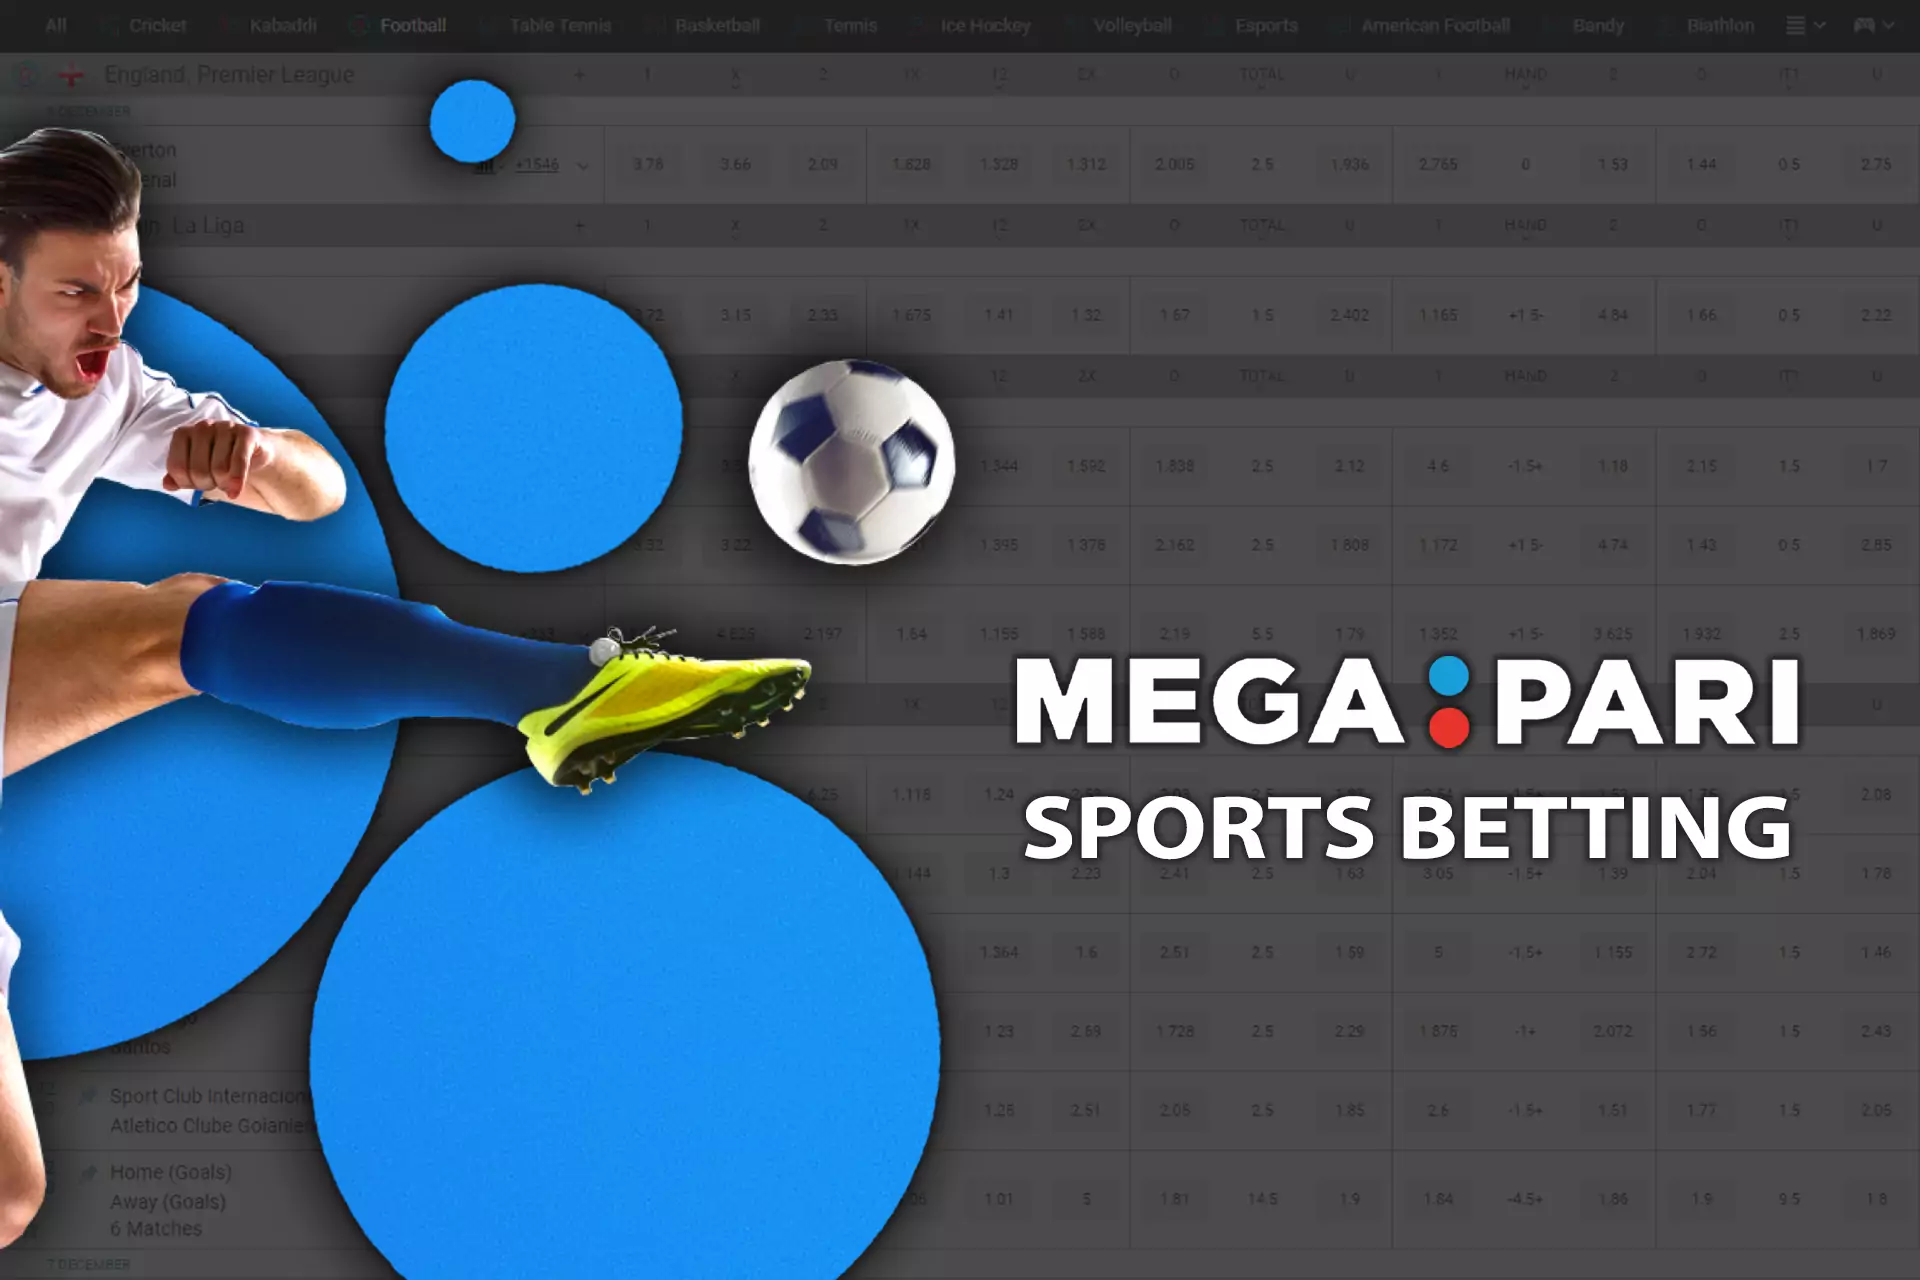 At MegaPari you can bet on the most popular sports events.